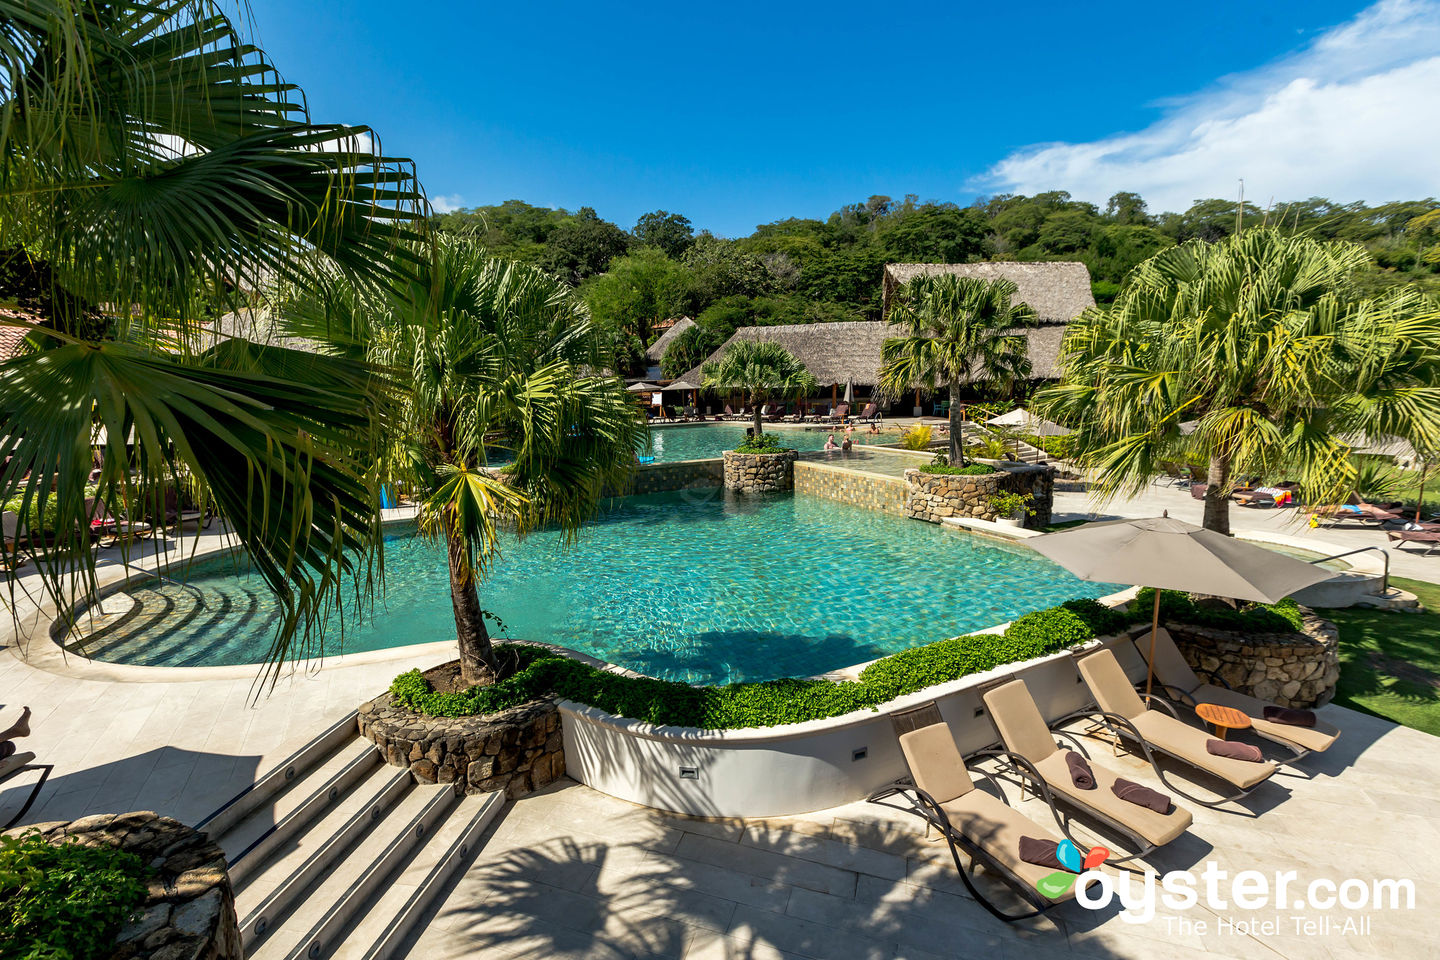 Secrets Papagayo Costa Rica Review: What To REALLY Expect If You Stay